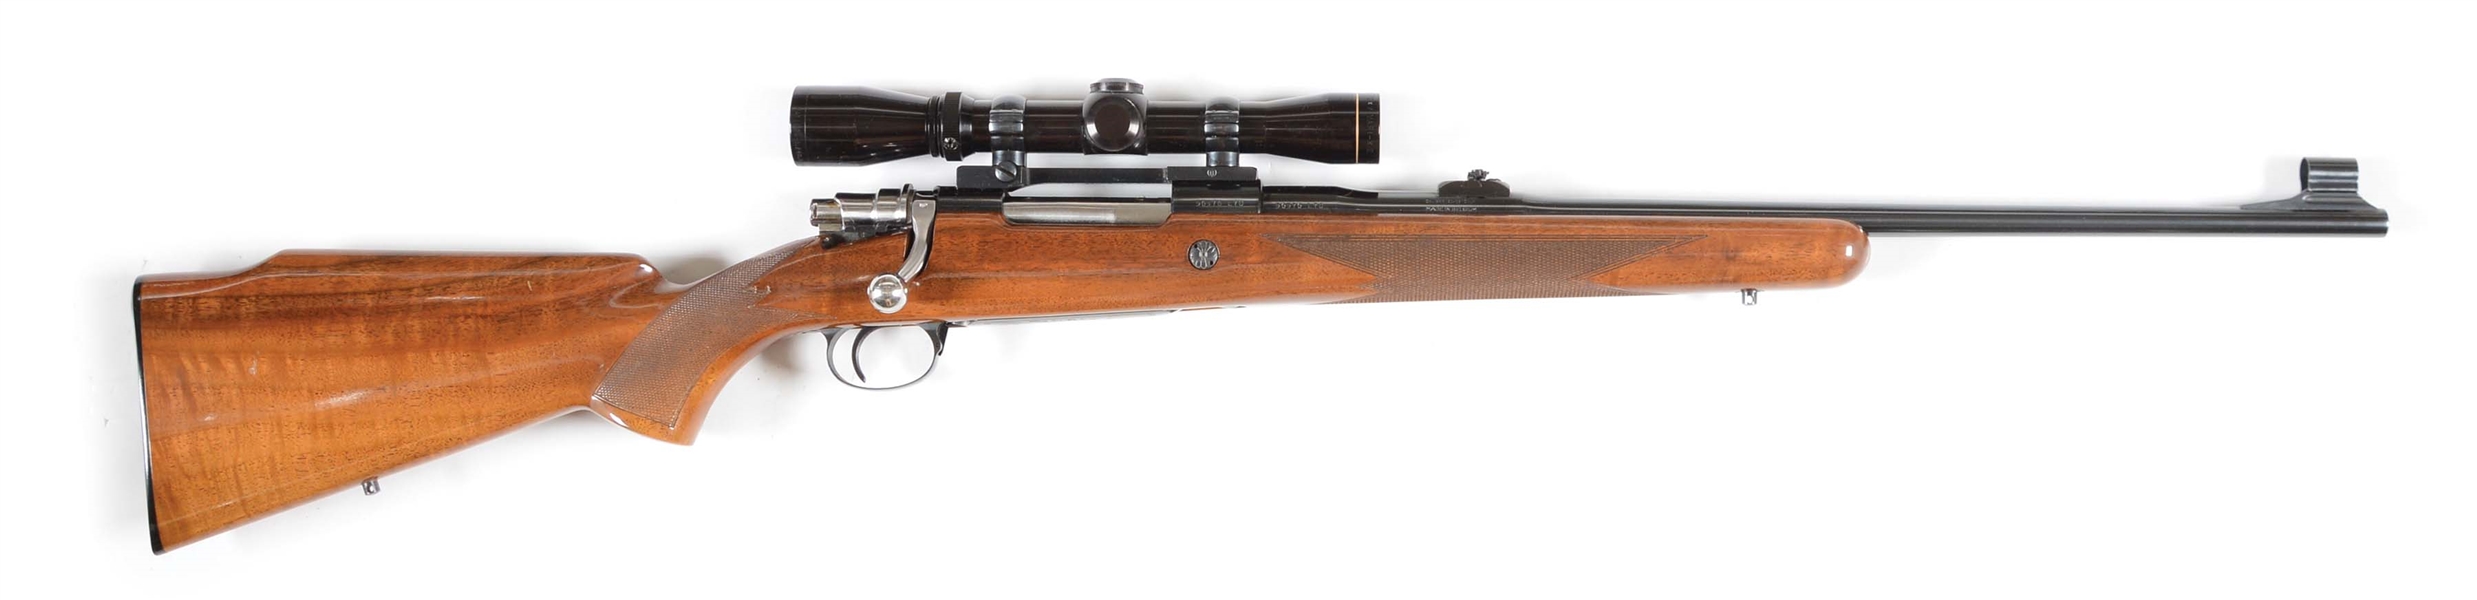 (M) BROWNING SAFARI GRADE BOLT ACTION RIFLE WITH SCOPE.